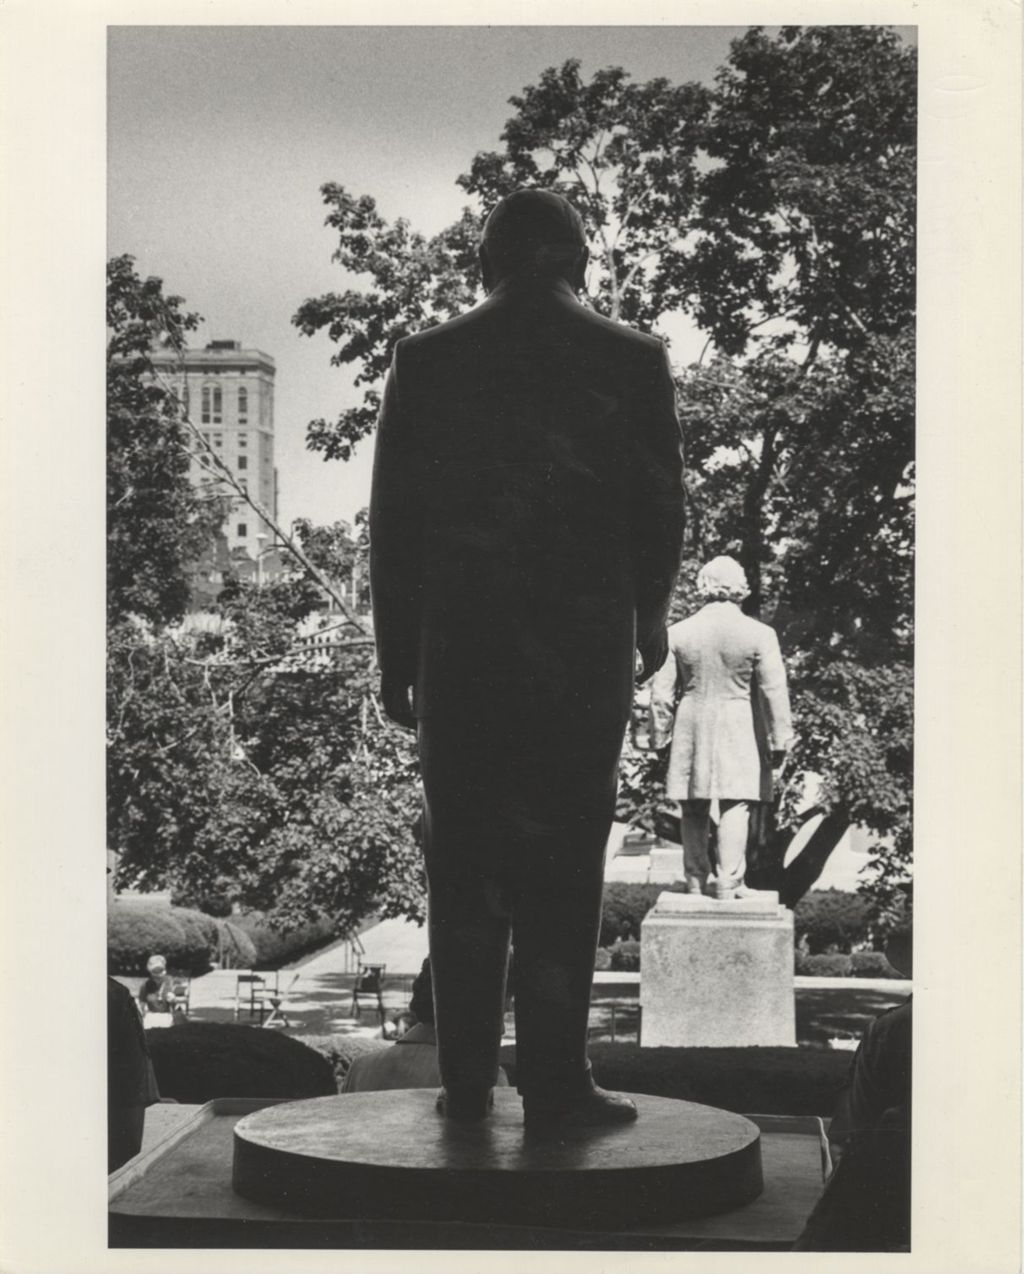 Back view of Richard J. Daley statue